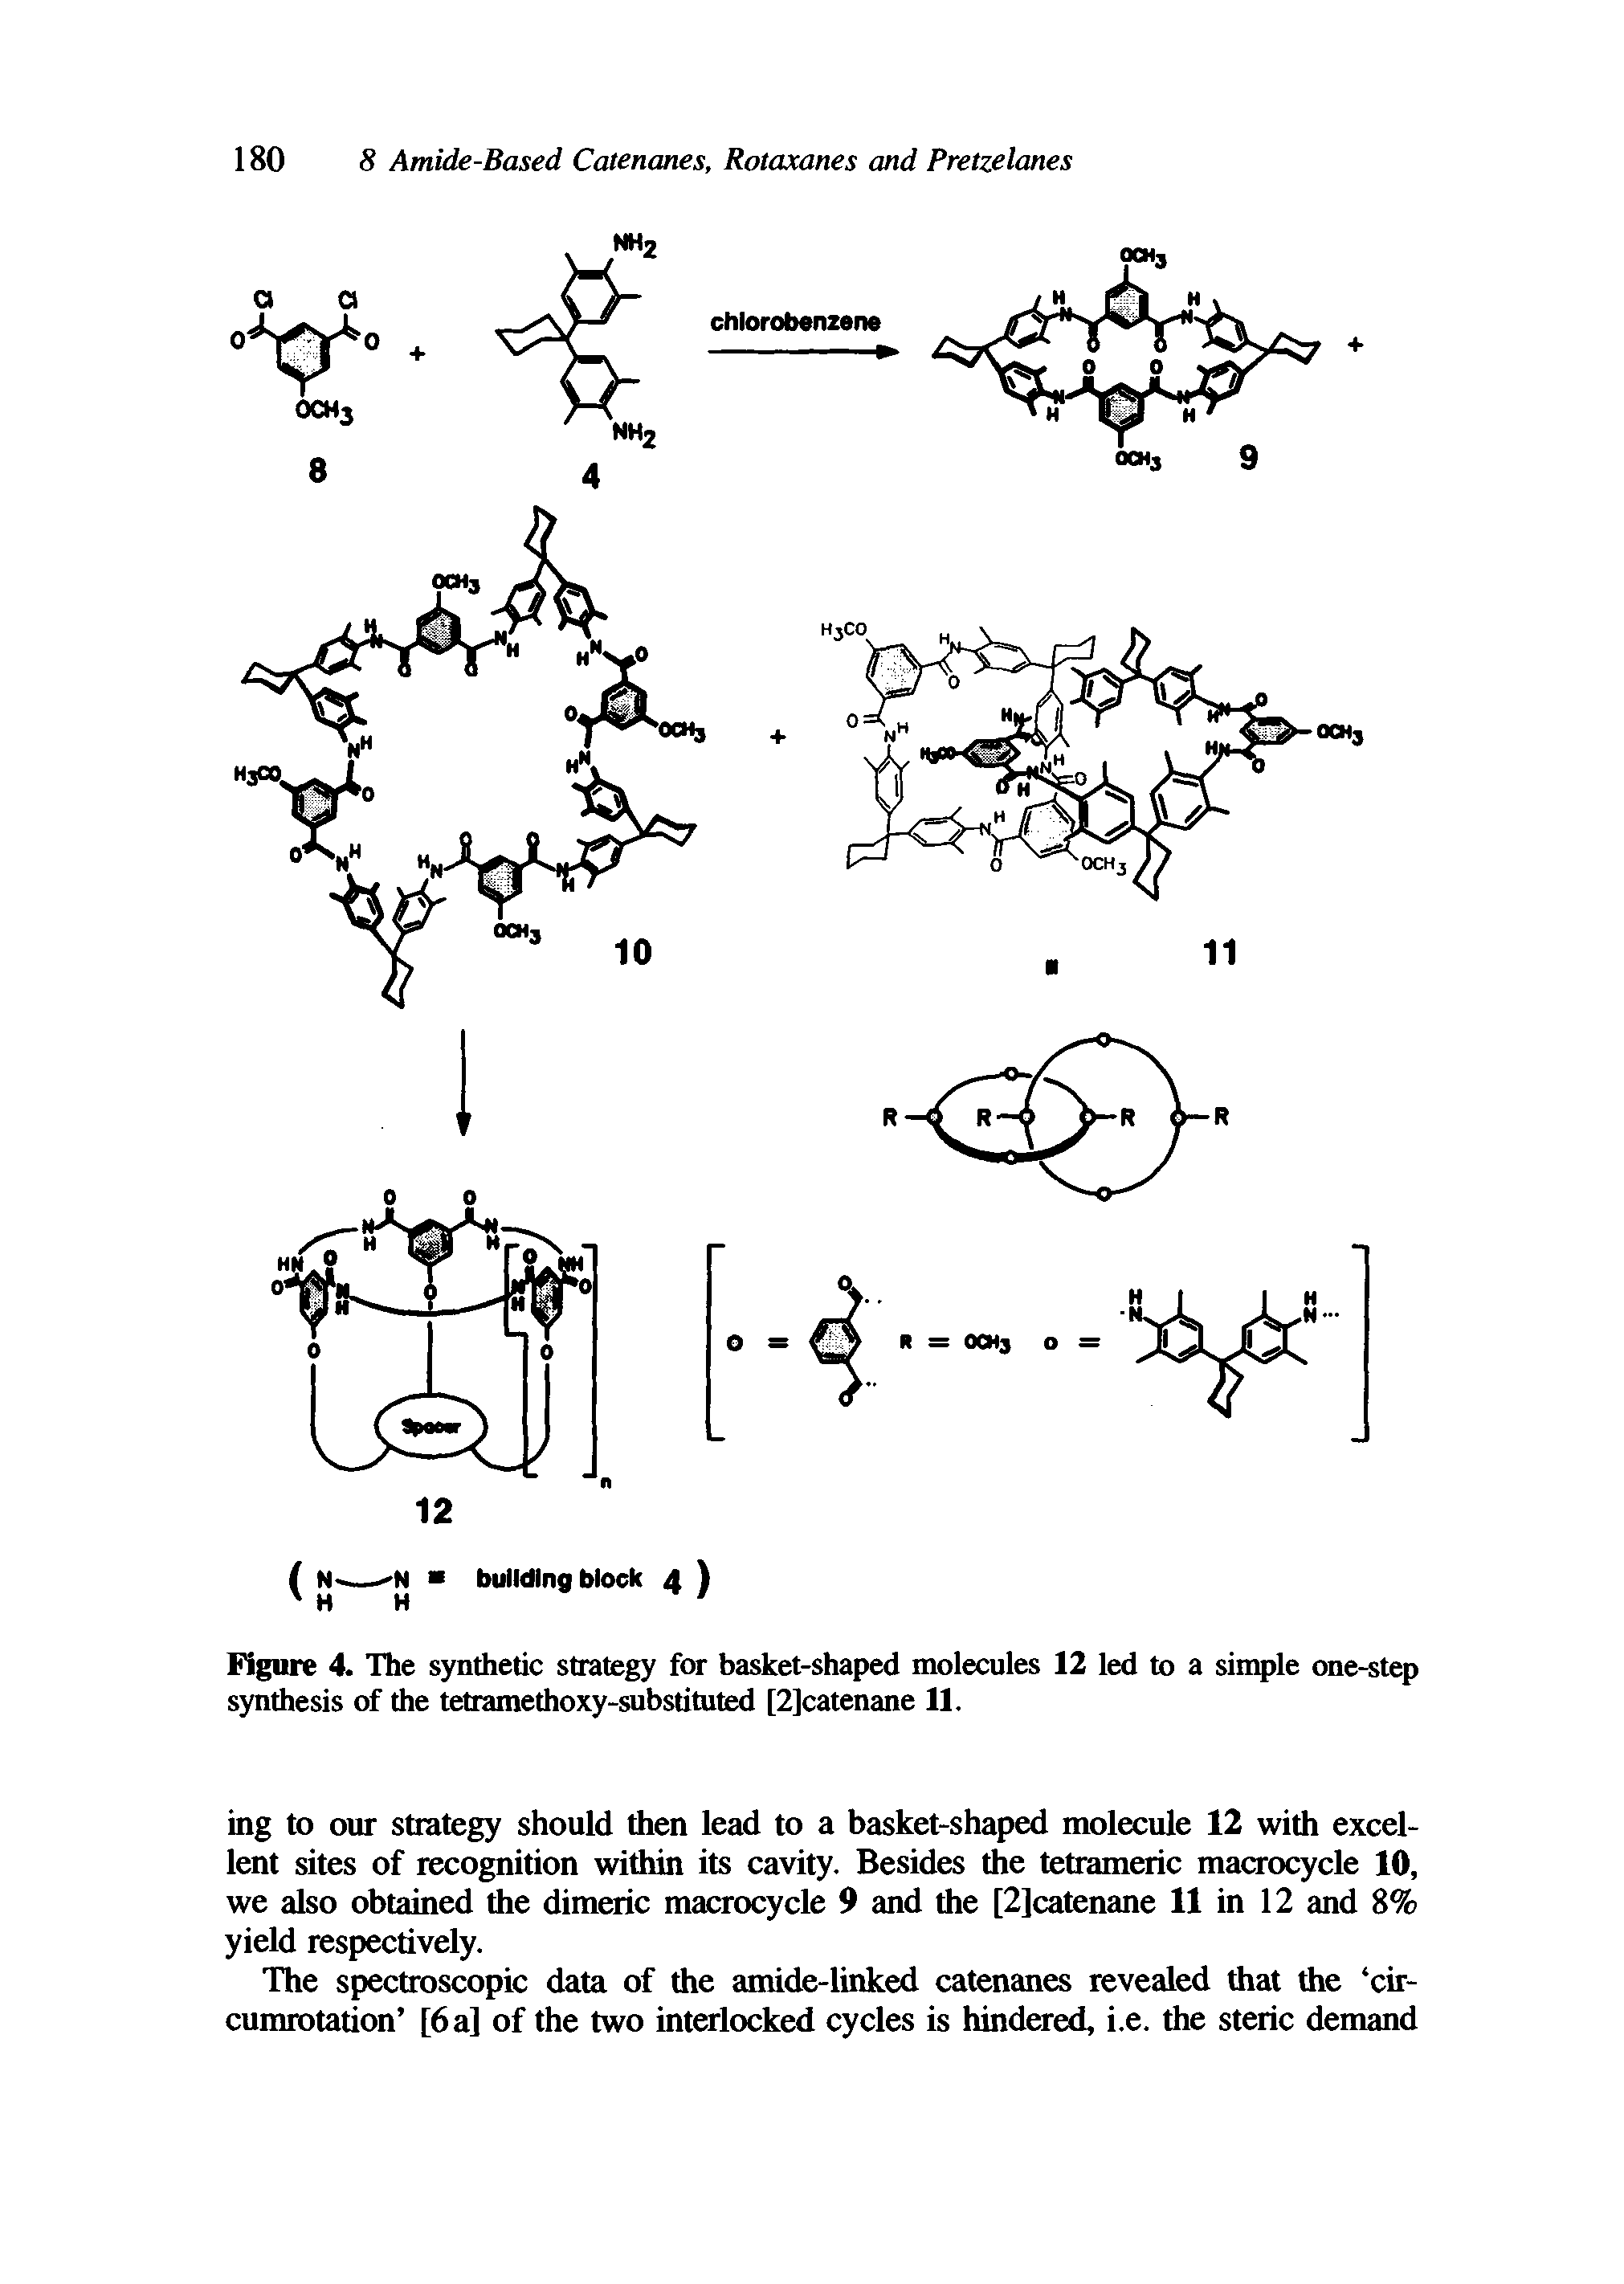 Figure 4. The synthetic strategy for basket-shaped molecules 12 led to a simple one-step synthesis of the tetramethoxy-substituted [2]catenane 11.